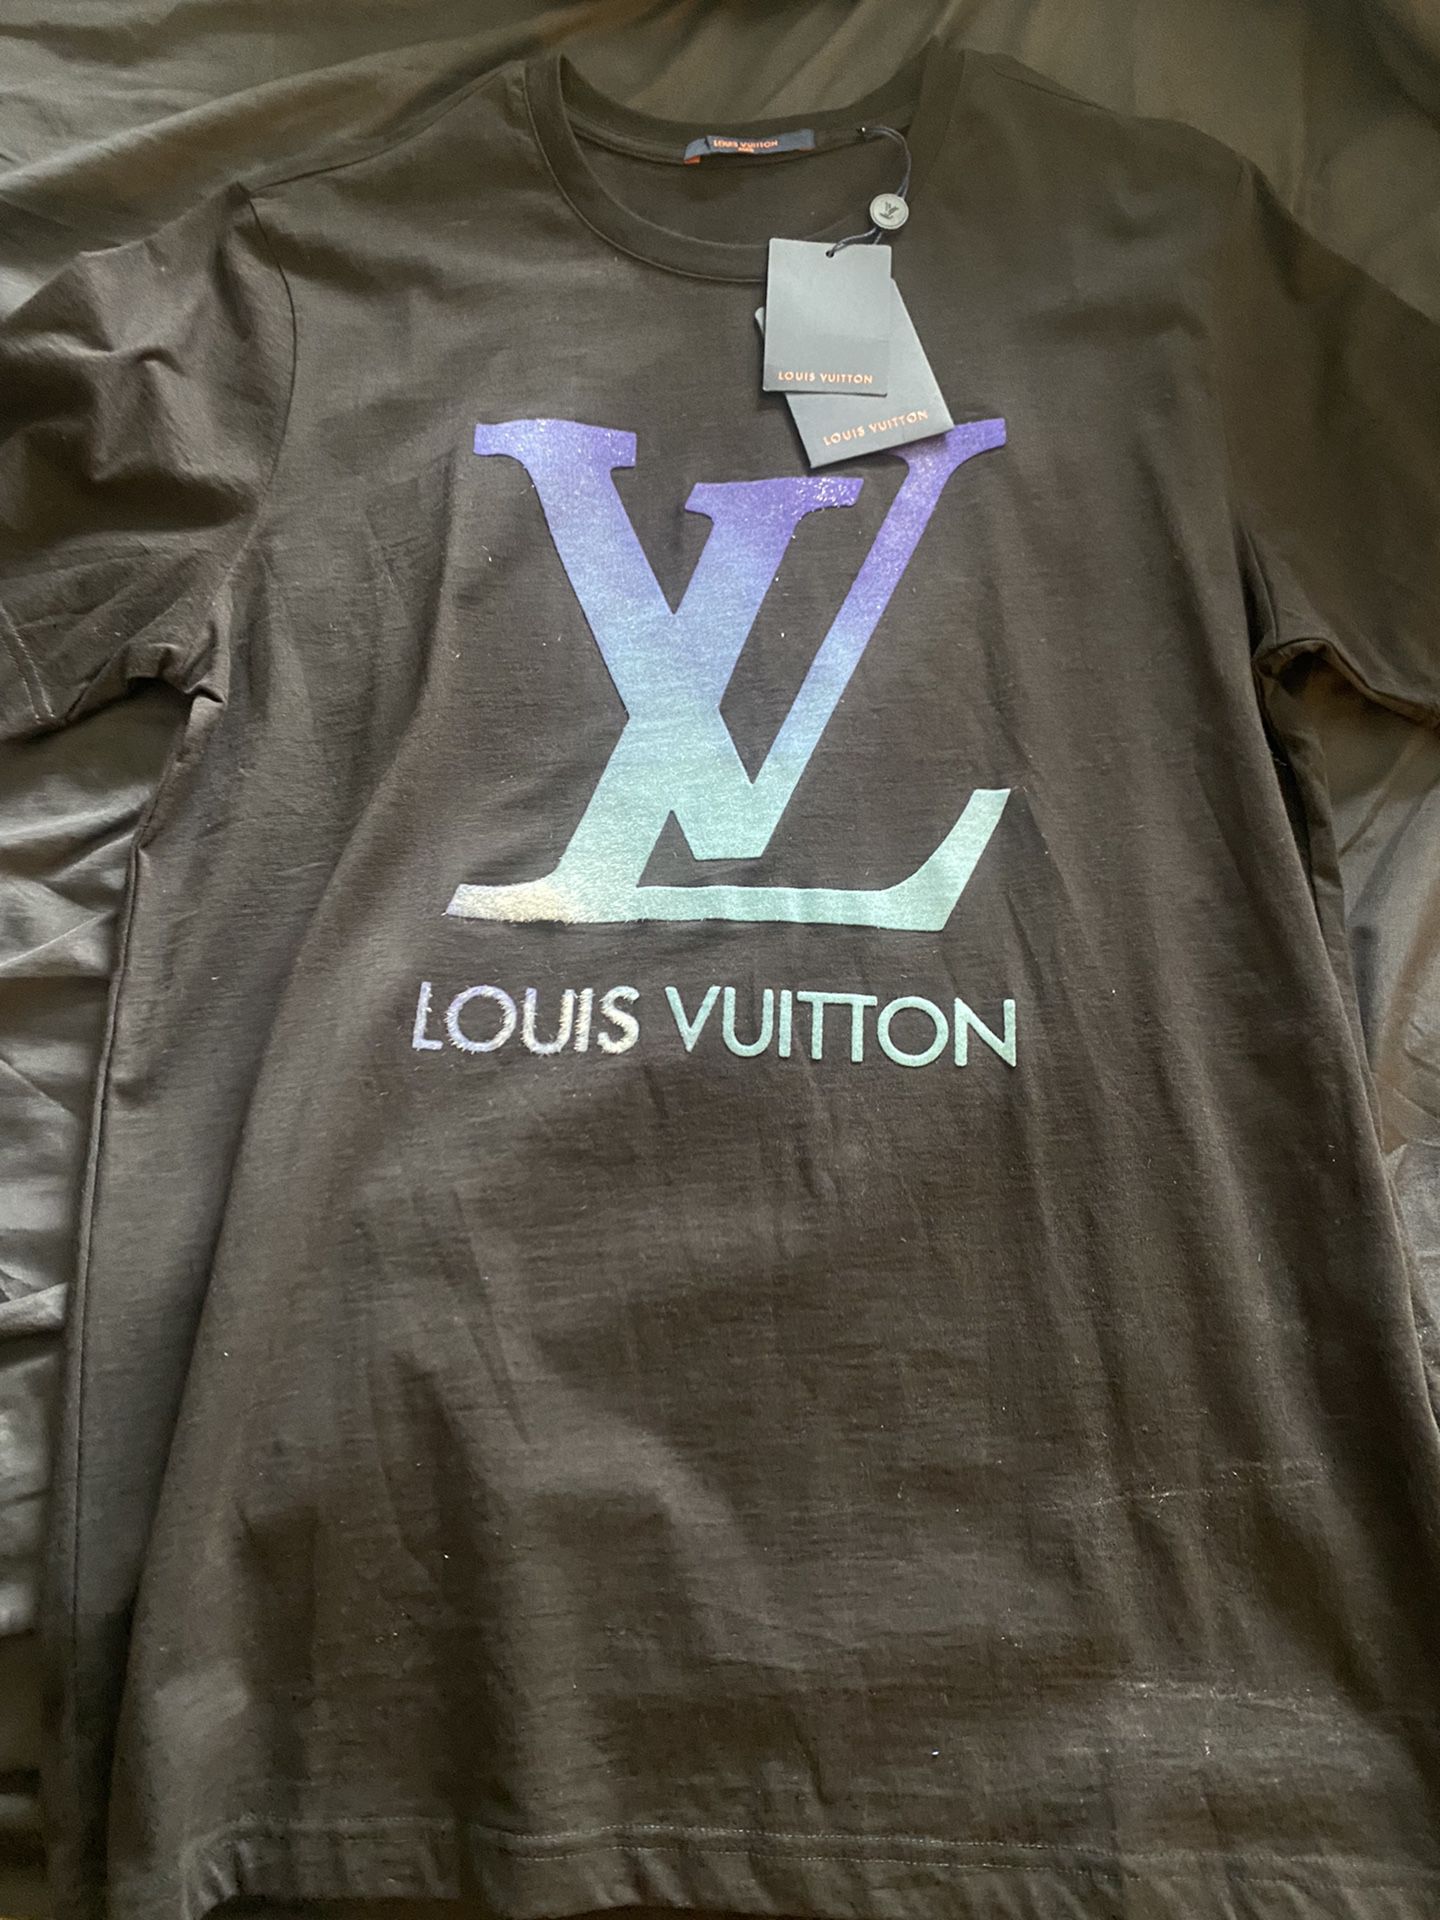 Louis Vuitton T-Shirt Size Medium for Sale in Queens, NY - OfferUp